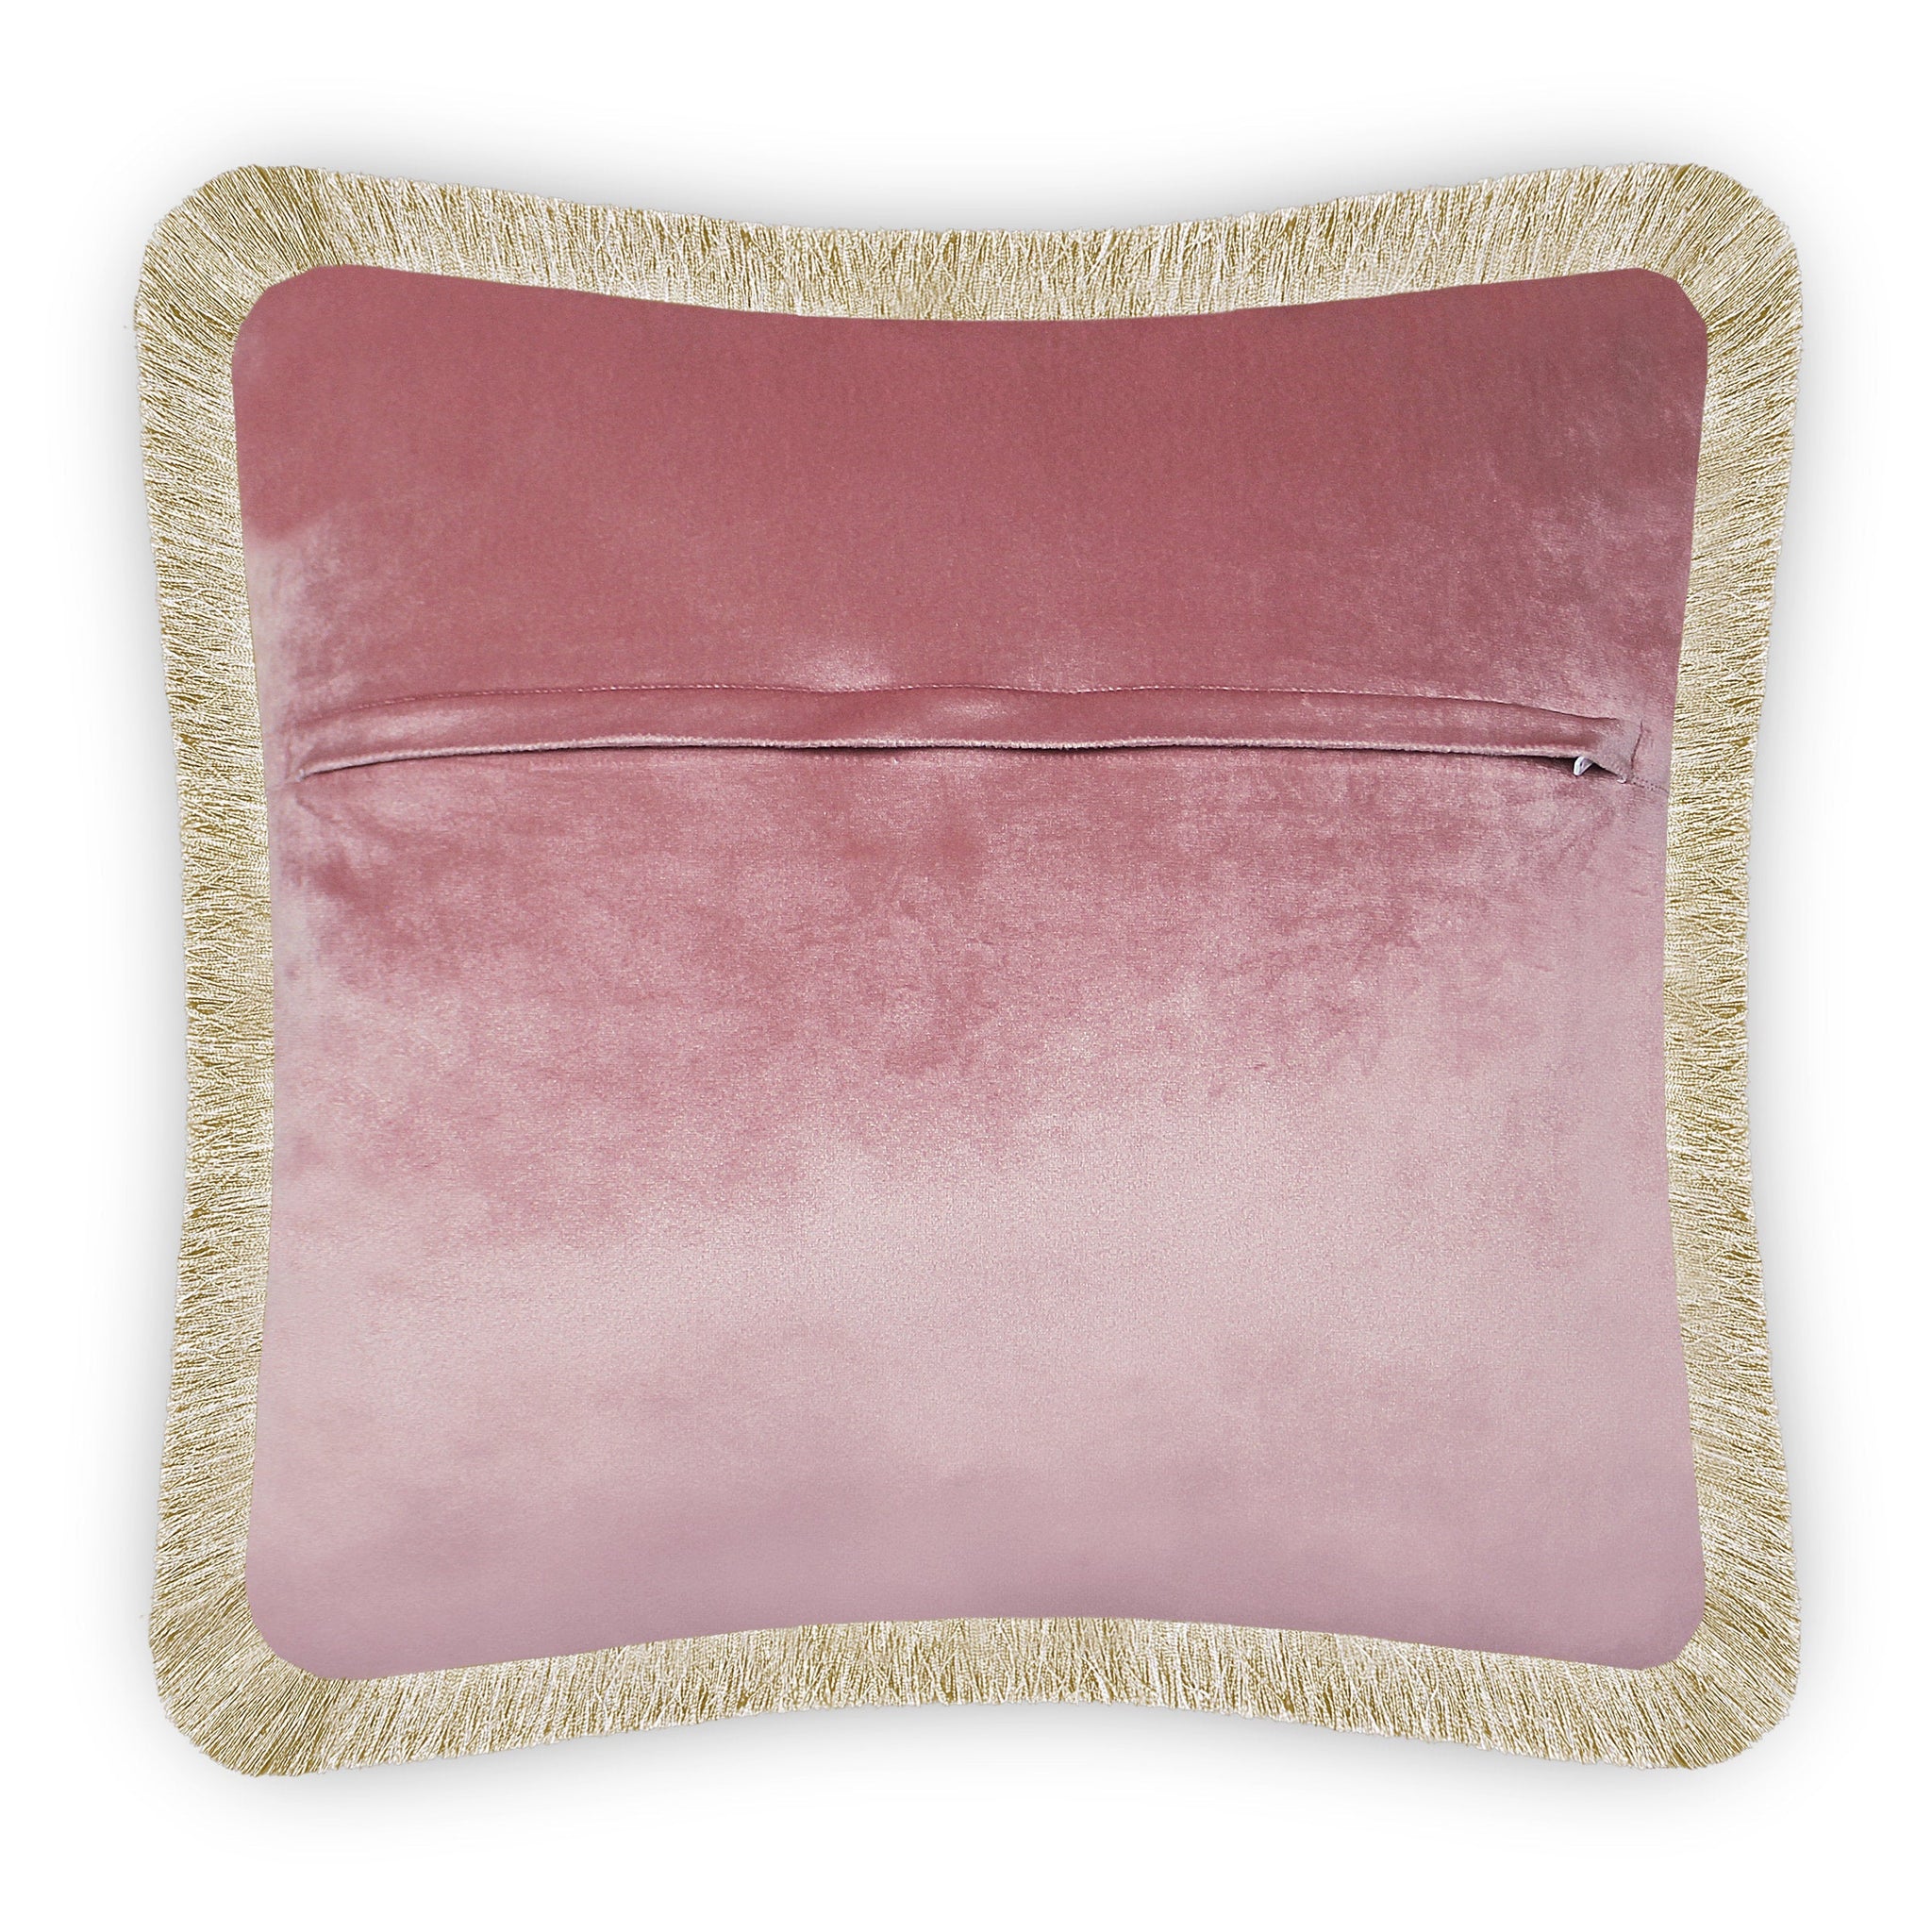 Pink Velvet Cushion Cover Chain and Belt Decorative Pillowcase Modern Home Decor Throw Pillow for Sofa Chair Living Room 45x45 cm 18x18 In